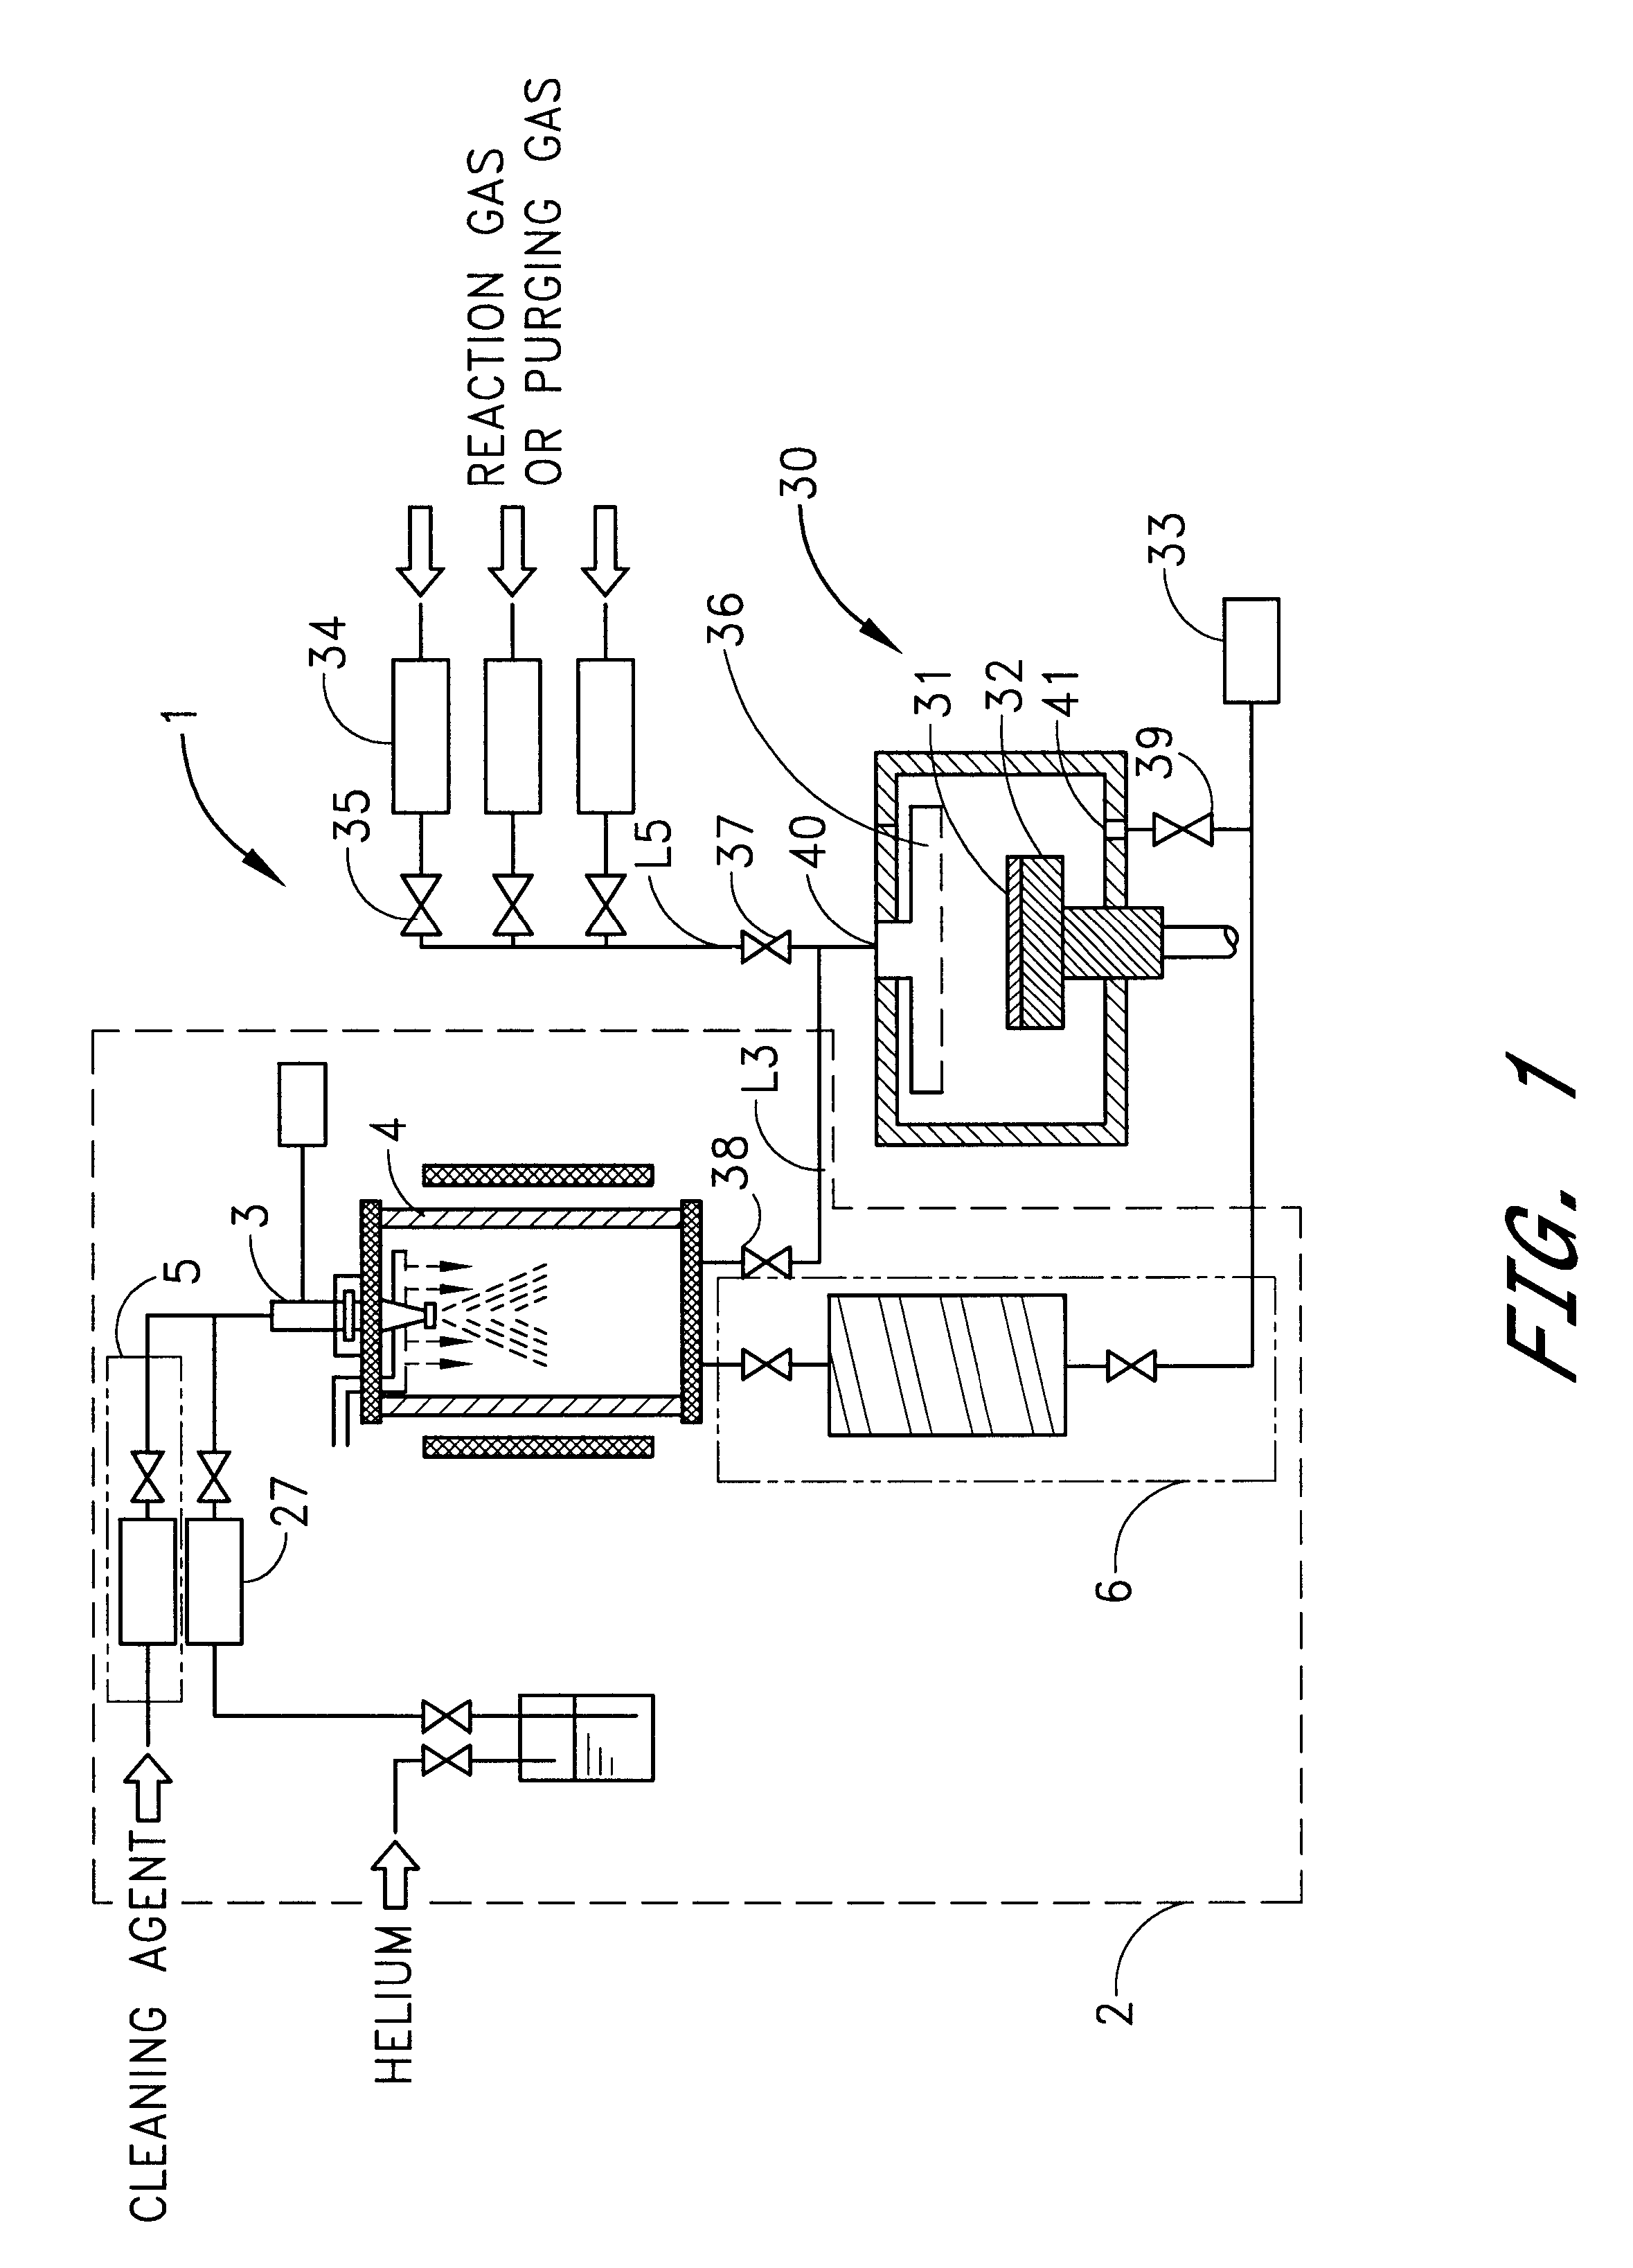 CVD apparatus for forming thin films using liquid reaction material